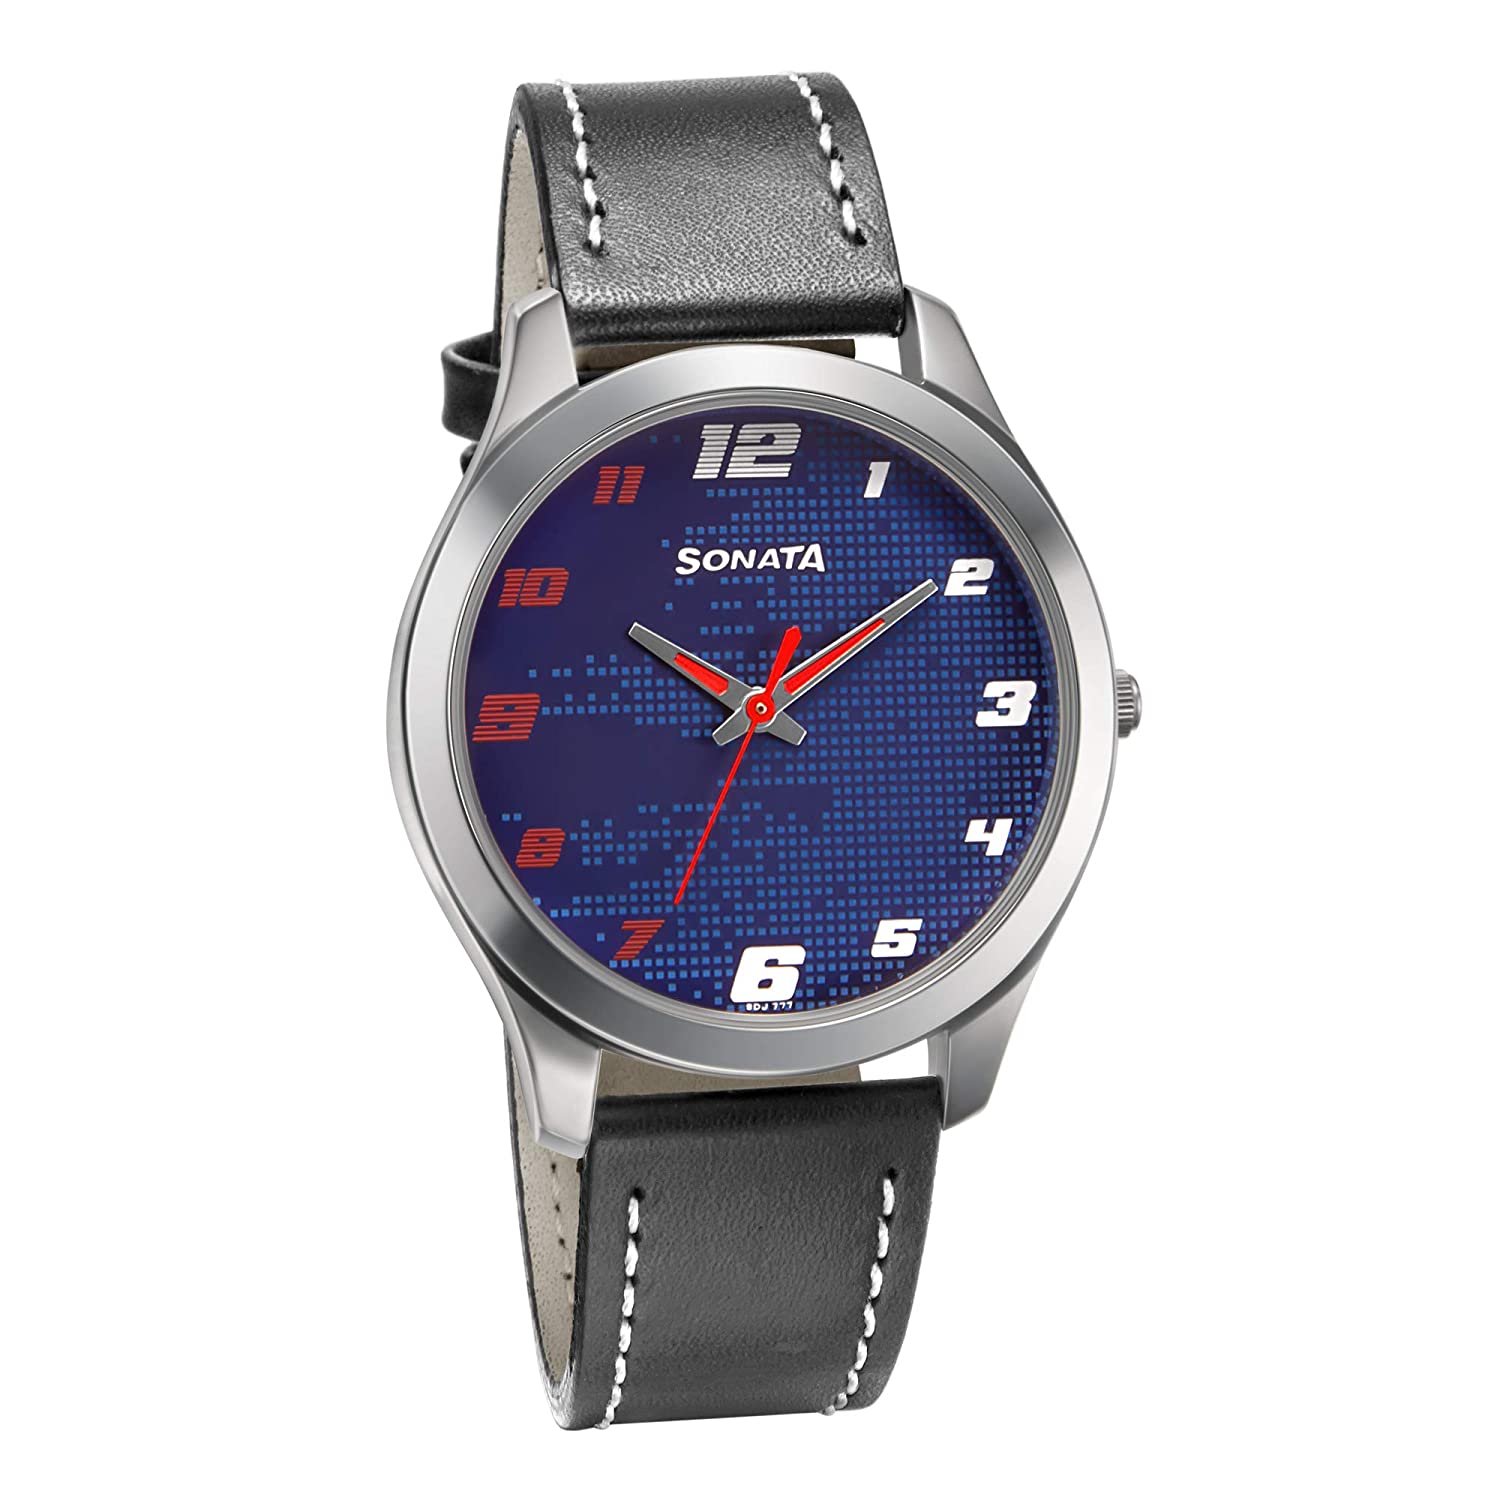 Sonata Rpm Analog Men's Watch 77063SL07 | Leather Band | Water-Resistant | Quartz Movement | Classic Style | Fashionable | Durable | Affordable | Halabh.com